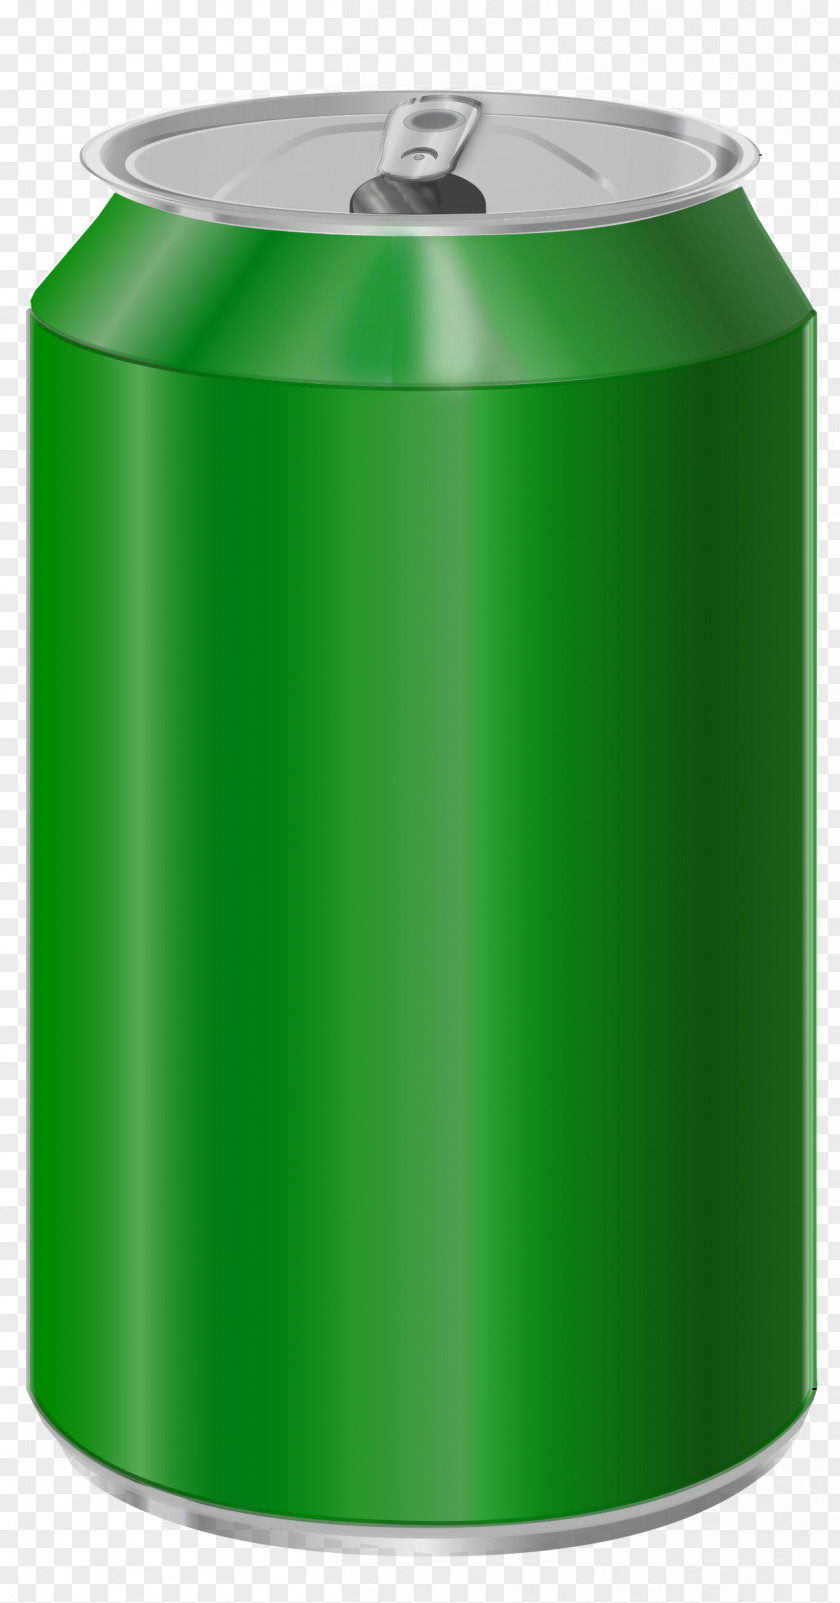 Aluminum Fizzy Drinks Coca-Cola Beer Carbonated Water Beverage Can PNG